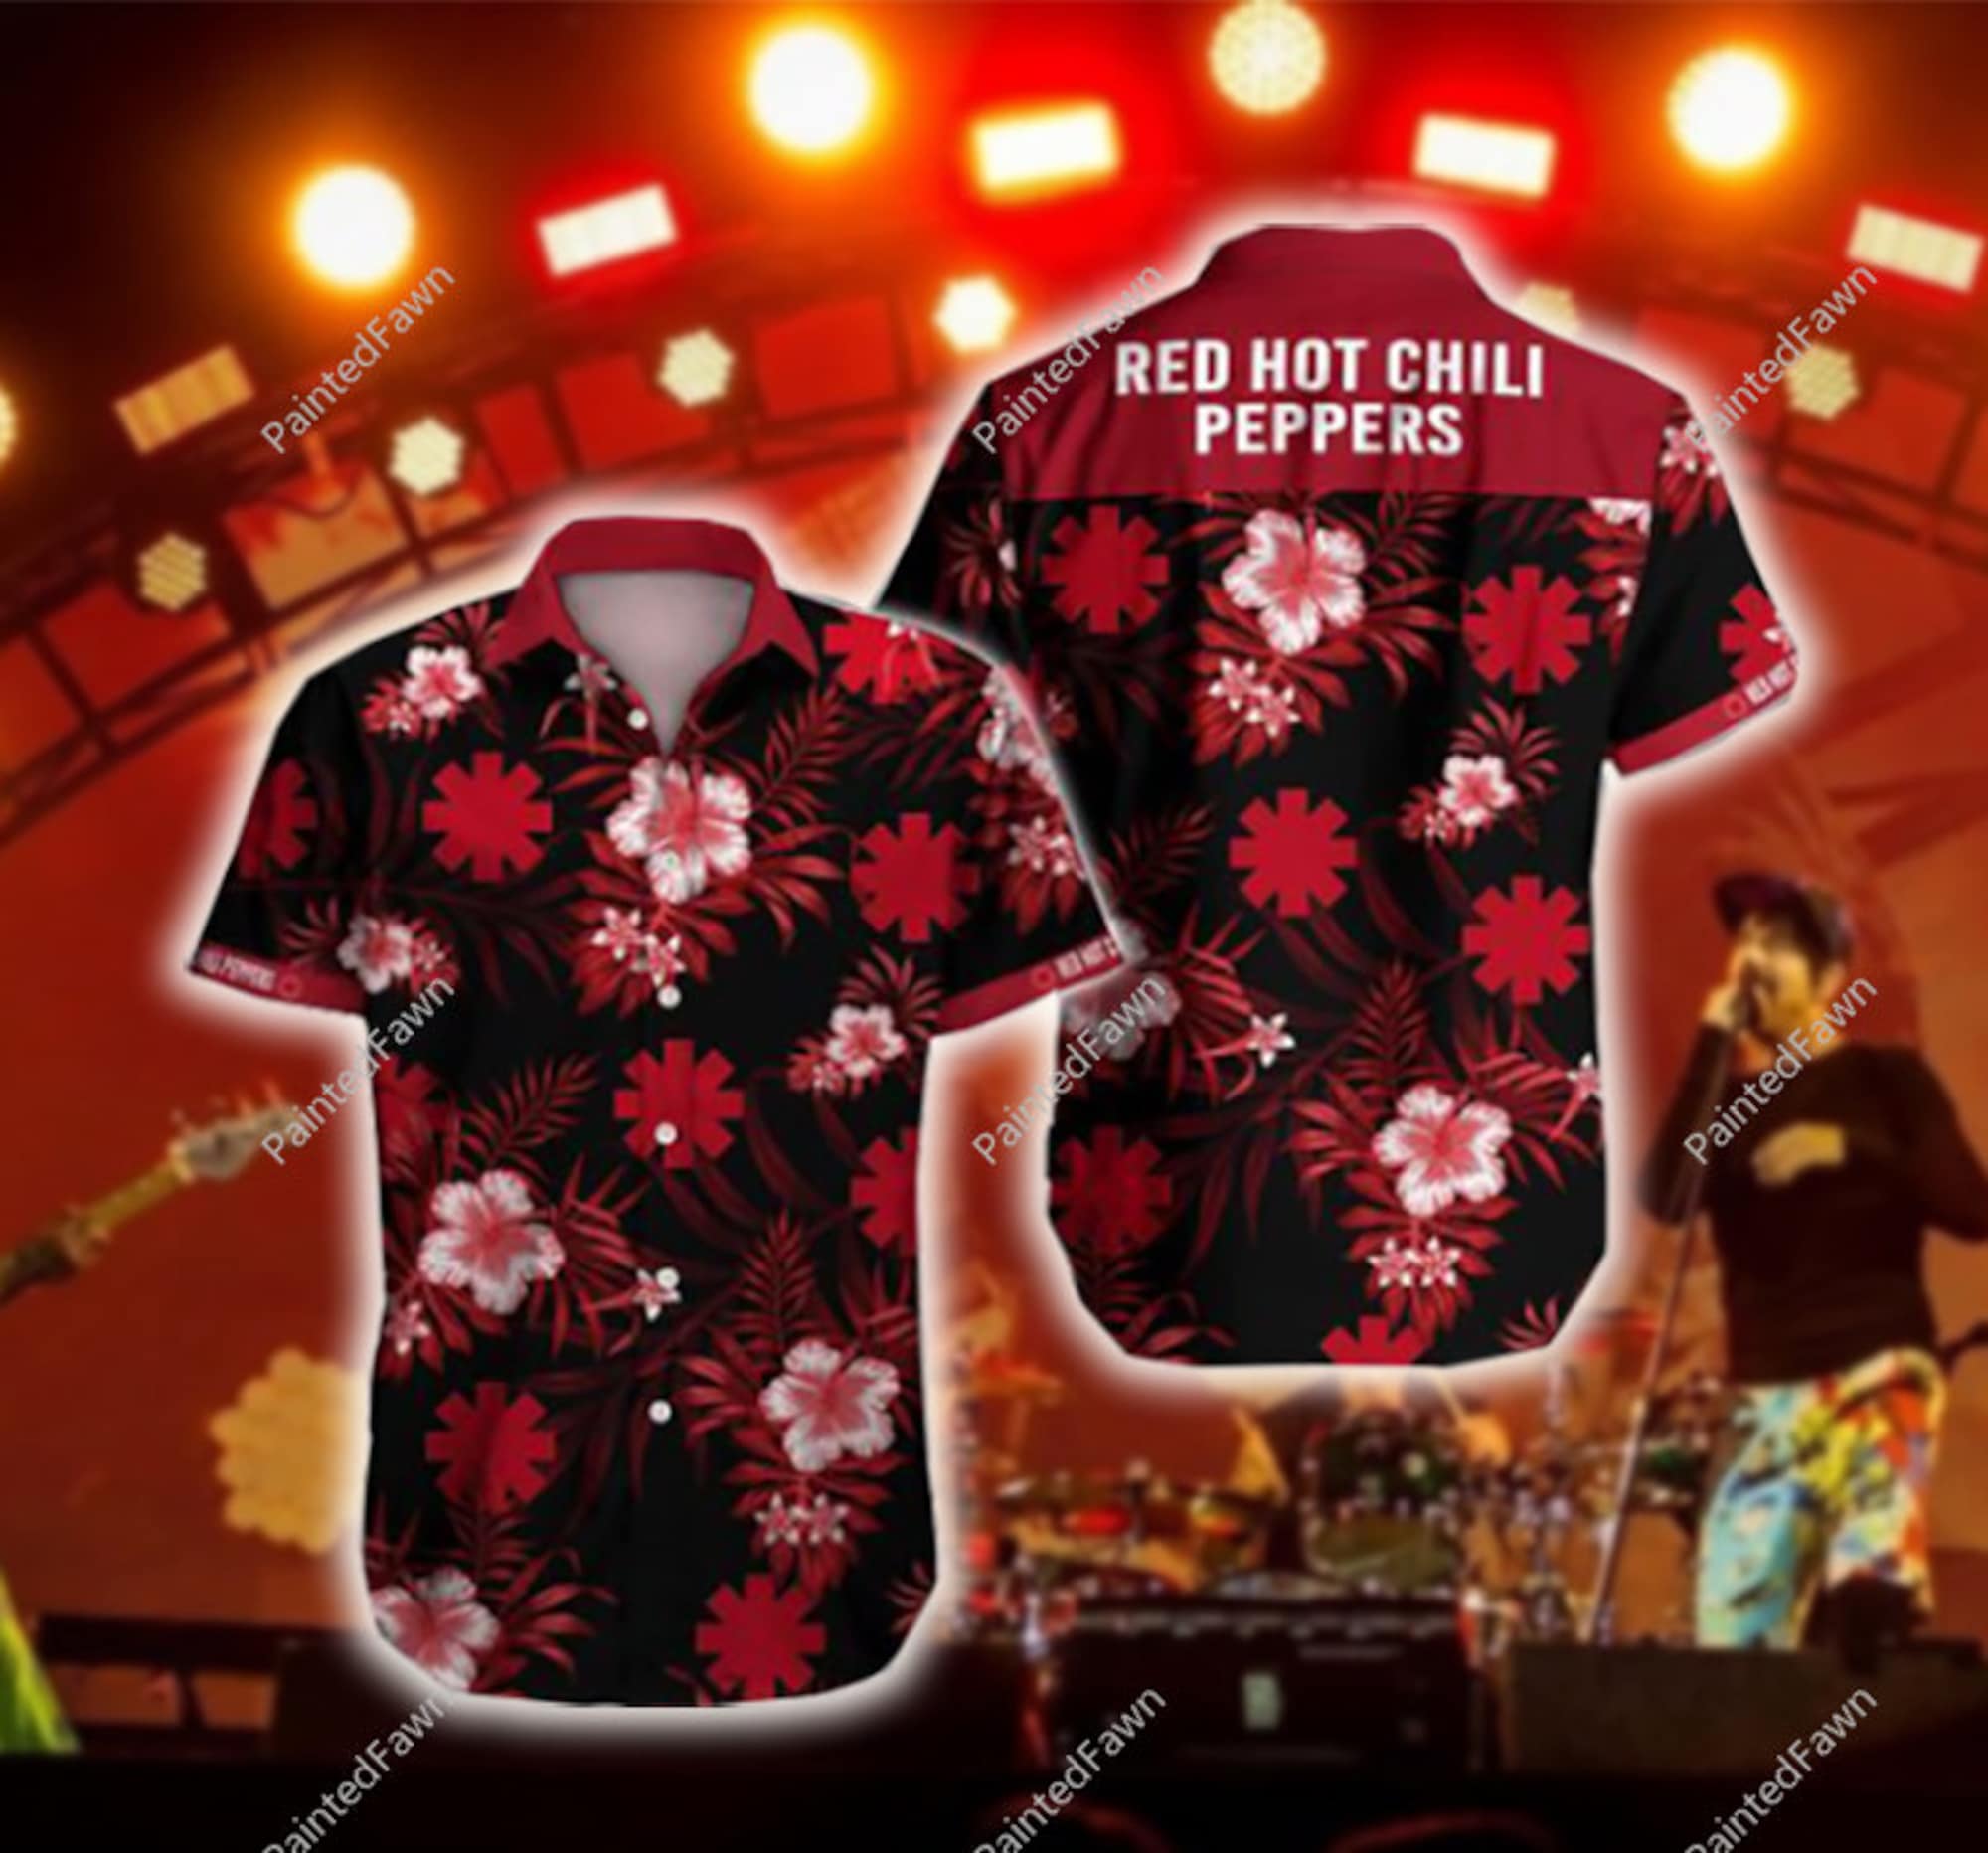 Discover 2022 Red Hot Chili Peppers Concert Hawaiian Shirt